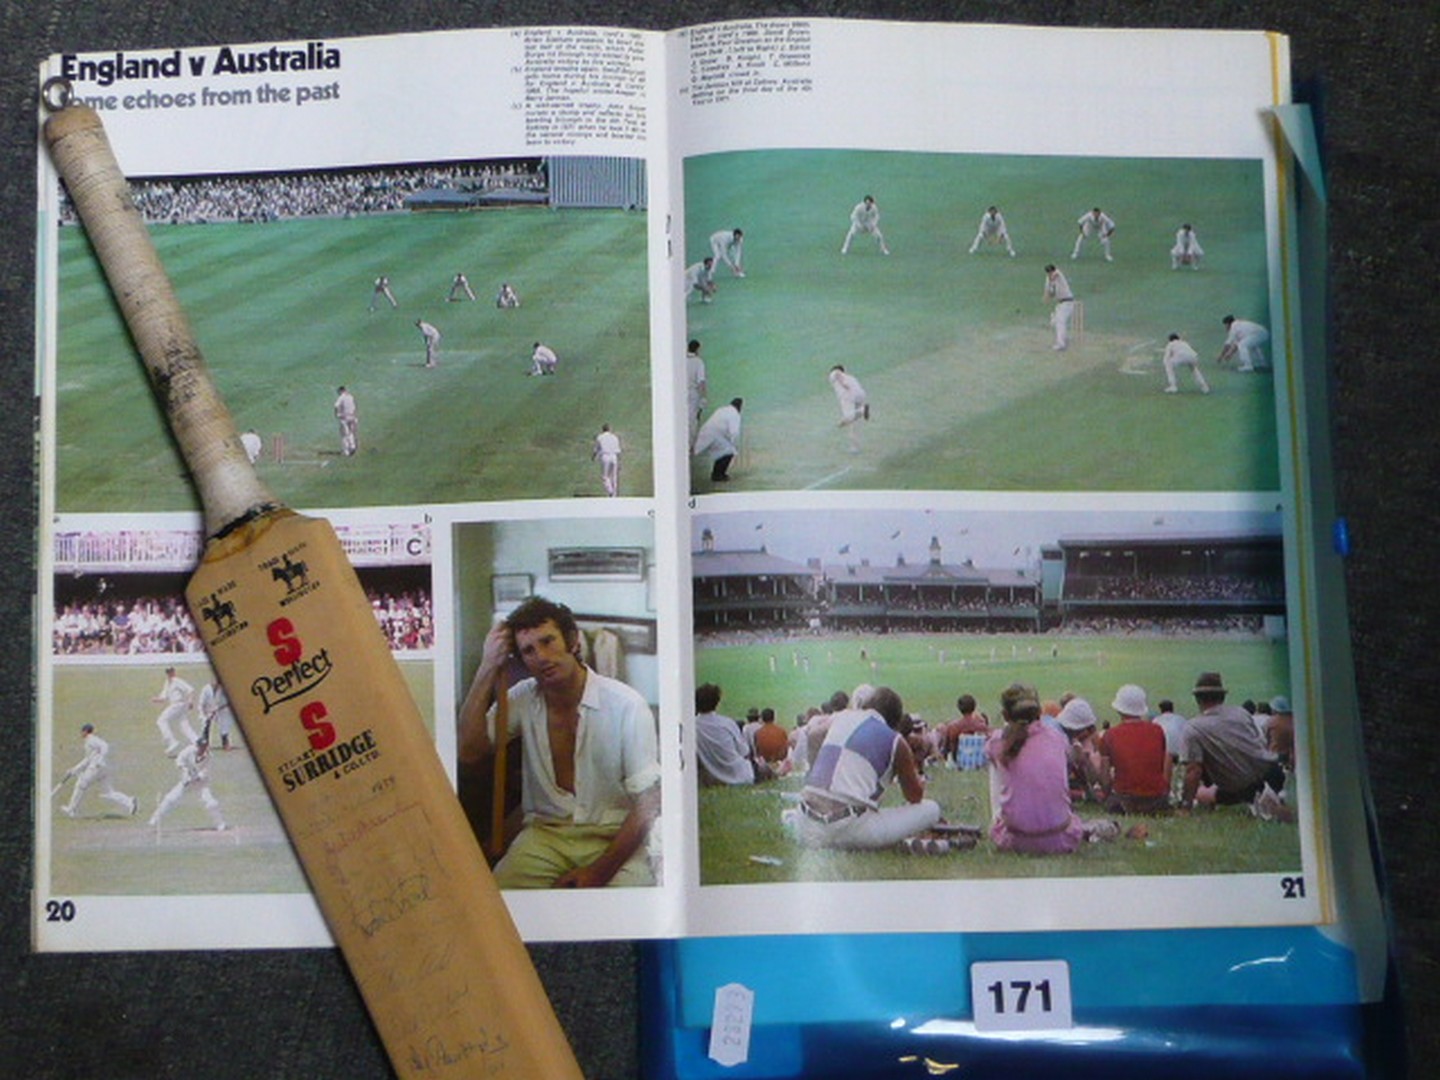 Cricket memorabilia to include a miniature bat with signatures including 'Chappell', 'Colley', '